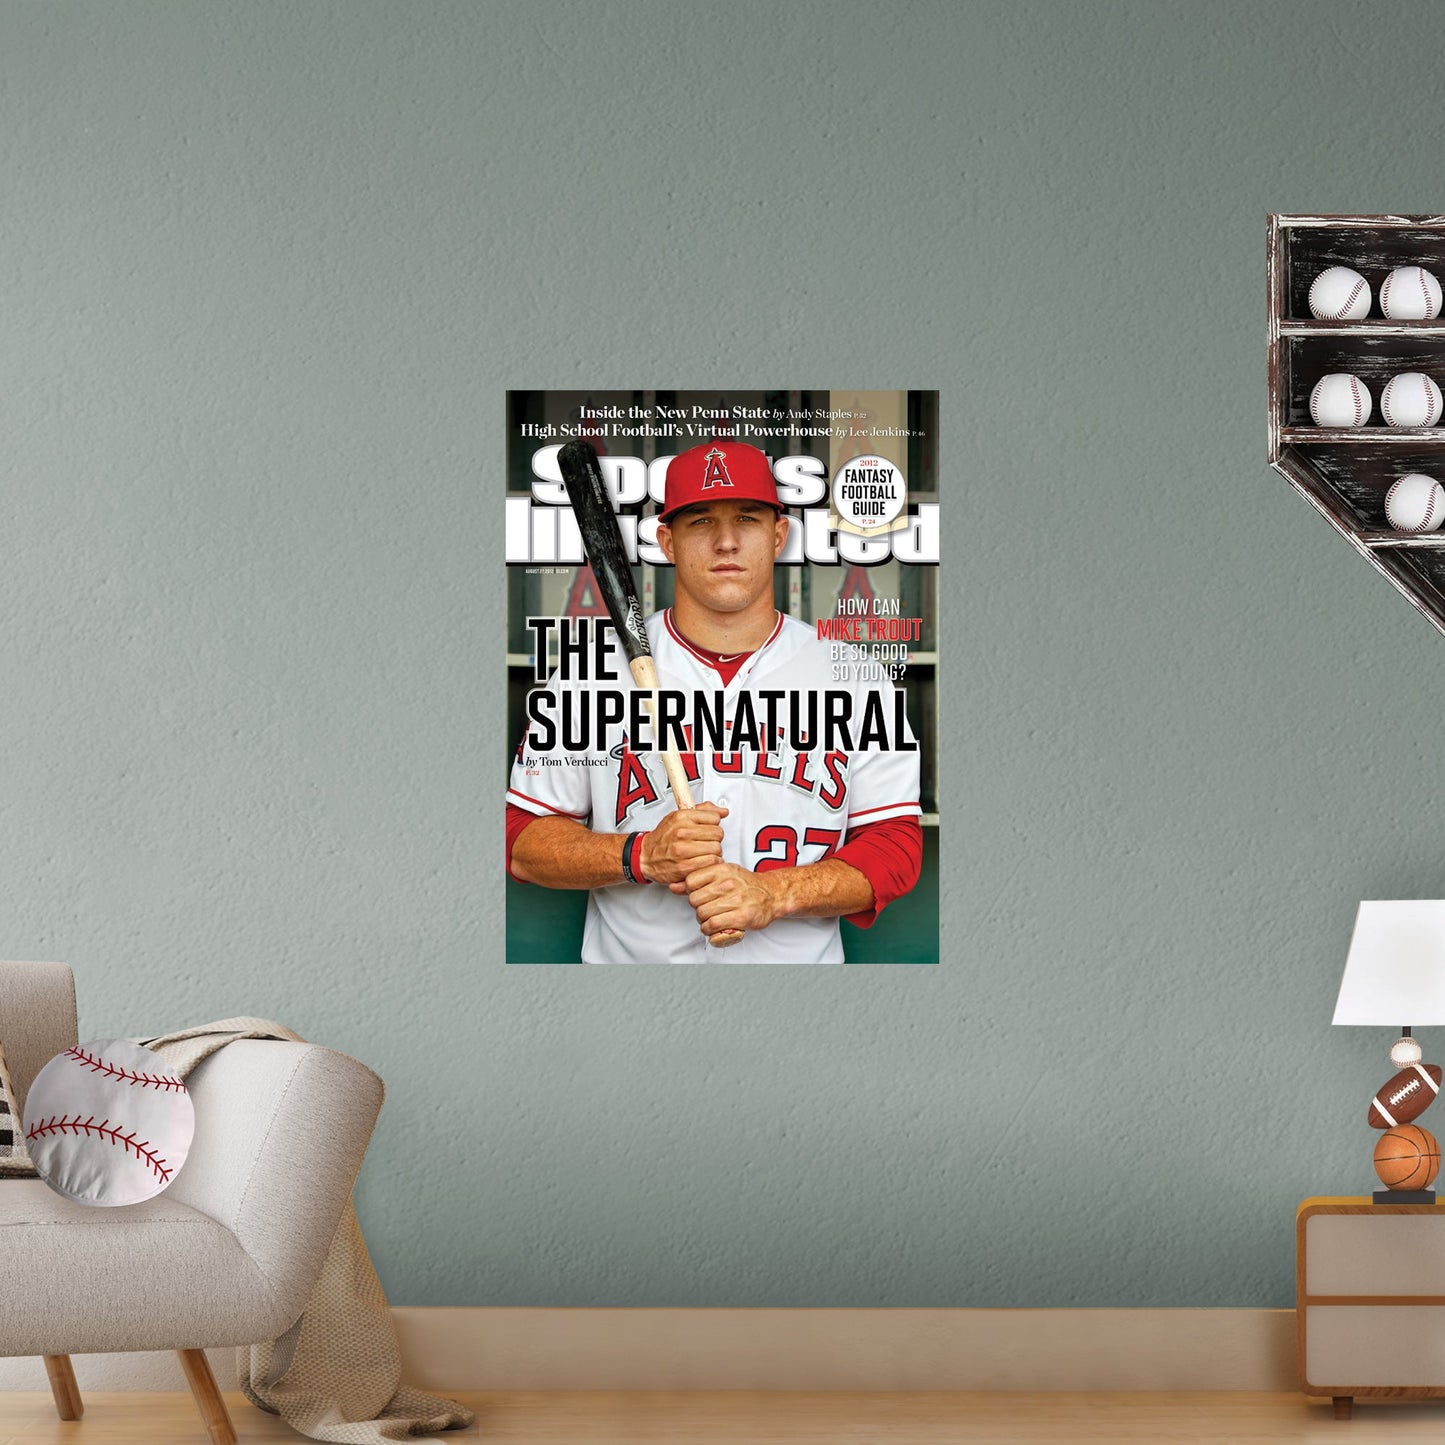 Los Angeles Angels: Mike Trout August 2012 Sports Illustrated Cover - Officially Licensed MLB Removable Adhesive Decal